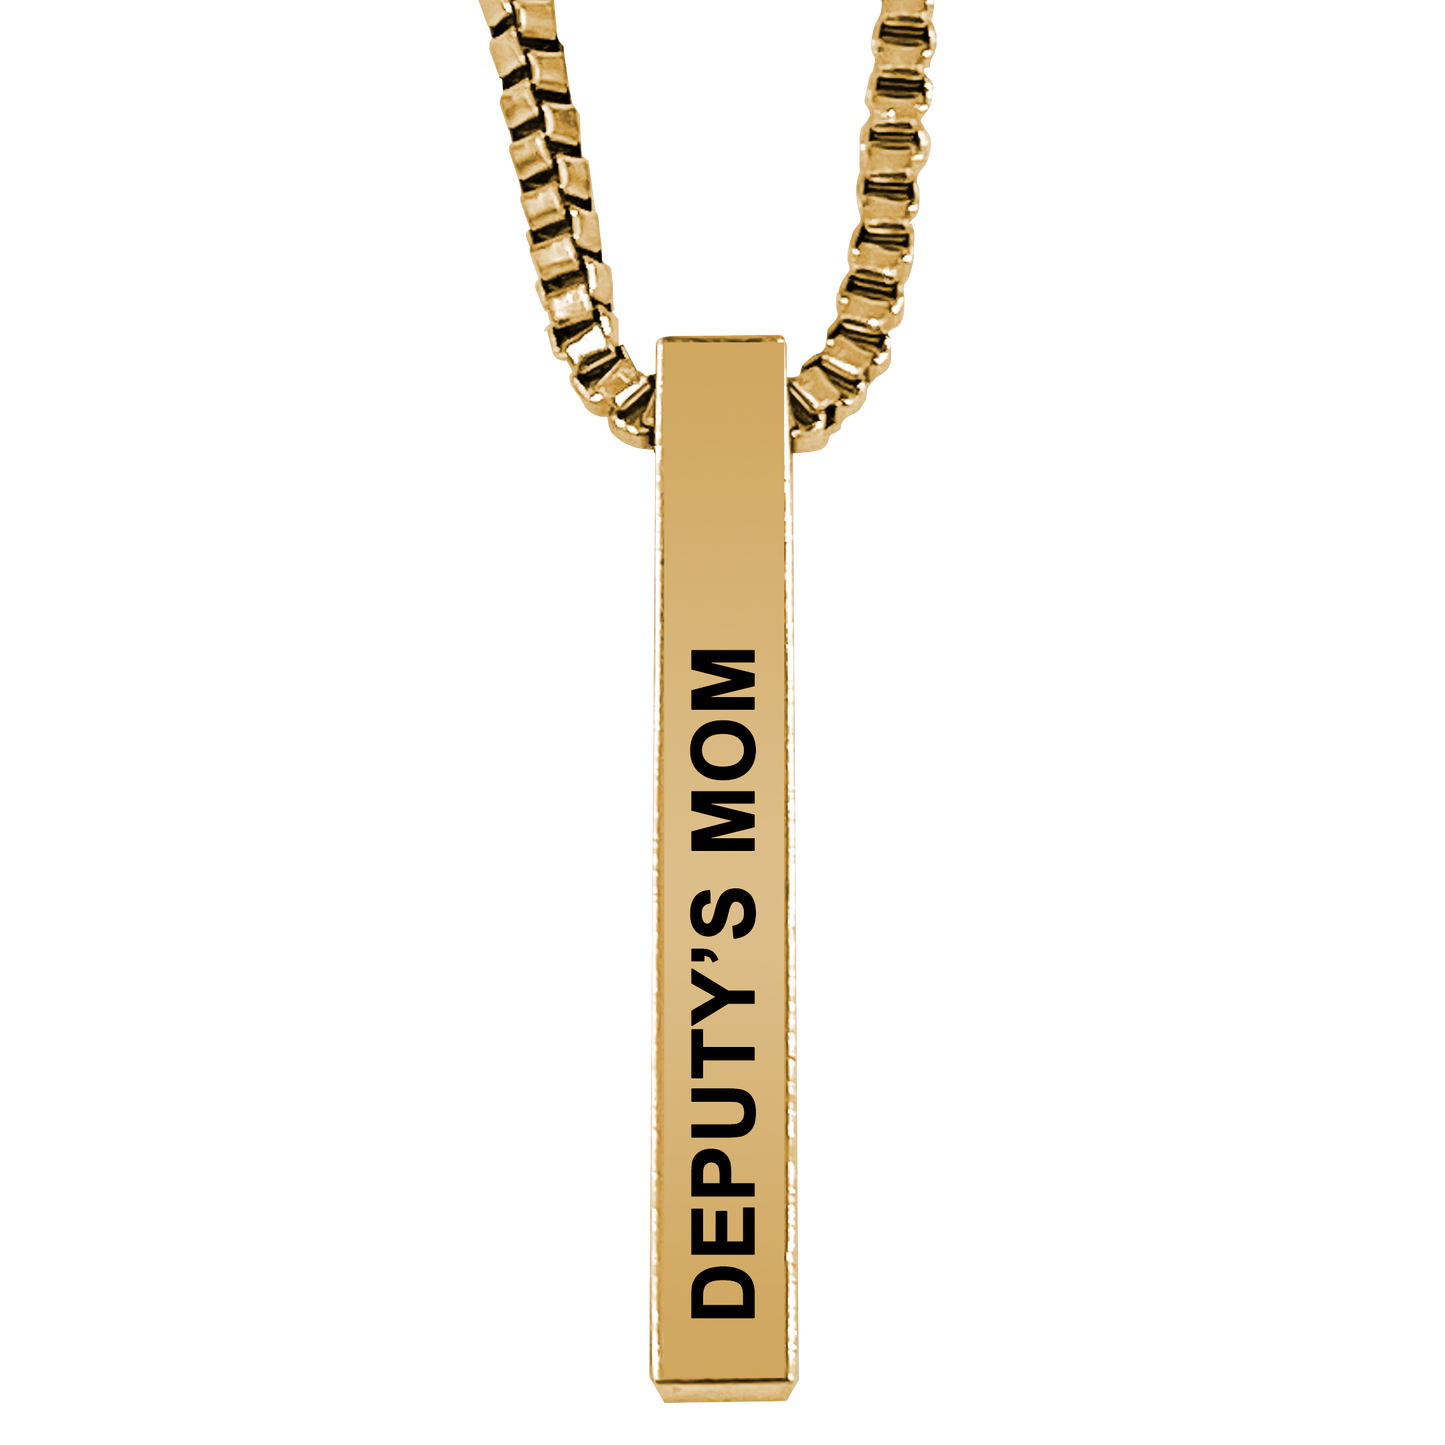 Deputy's Mom Gold Plated Pillar Bar Pendant Necklace Gift Mother's Day Christmas Holiday Anniversary Police Sheriff Officer First Responder Law Enforcement